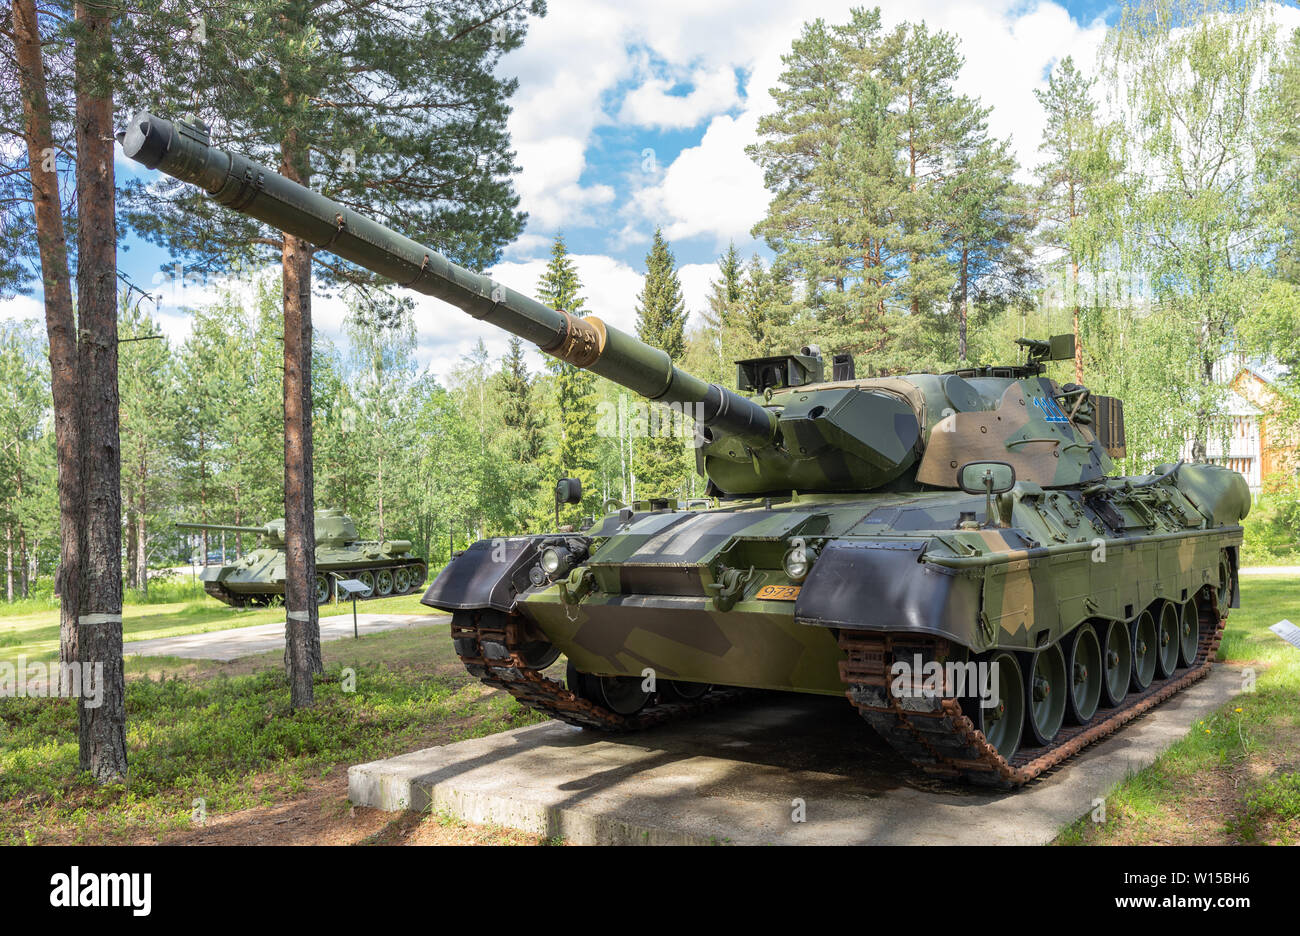 Retired German-made Leopard 1 main battle tank of the Norwegian Army, displayed in a tank park in Rena Leir, Norway. Stock Photo